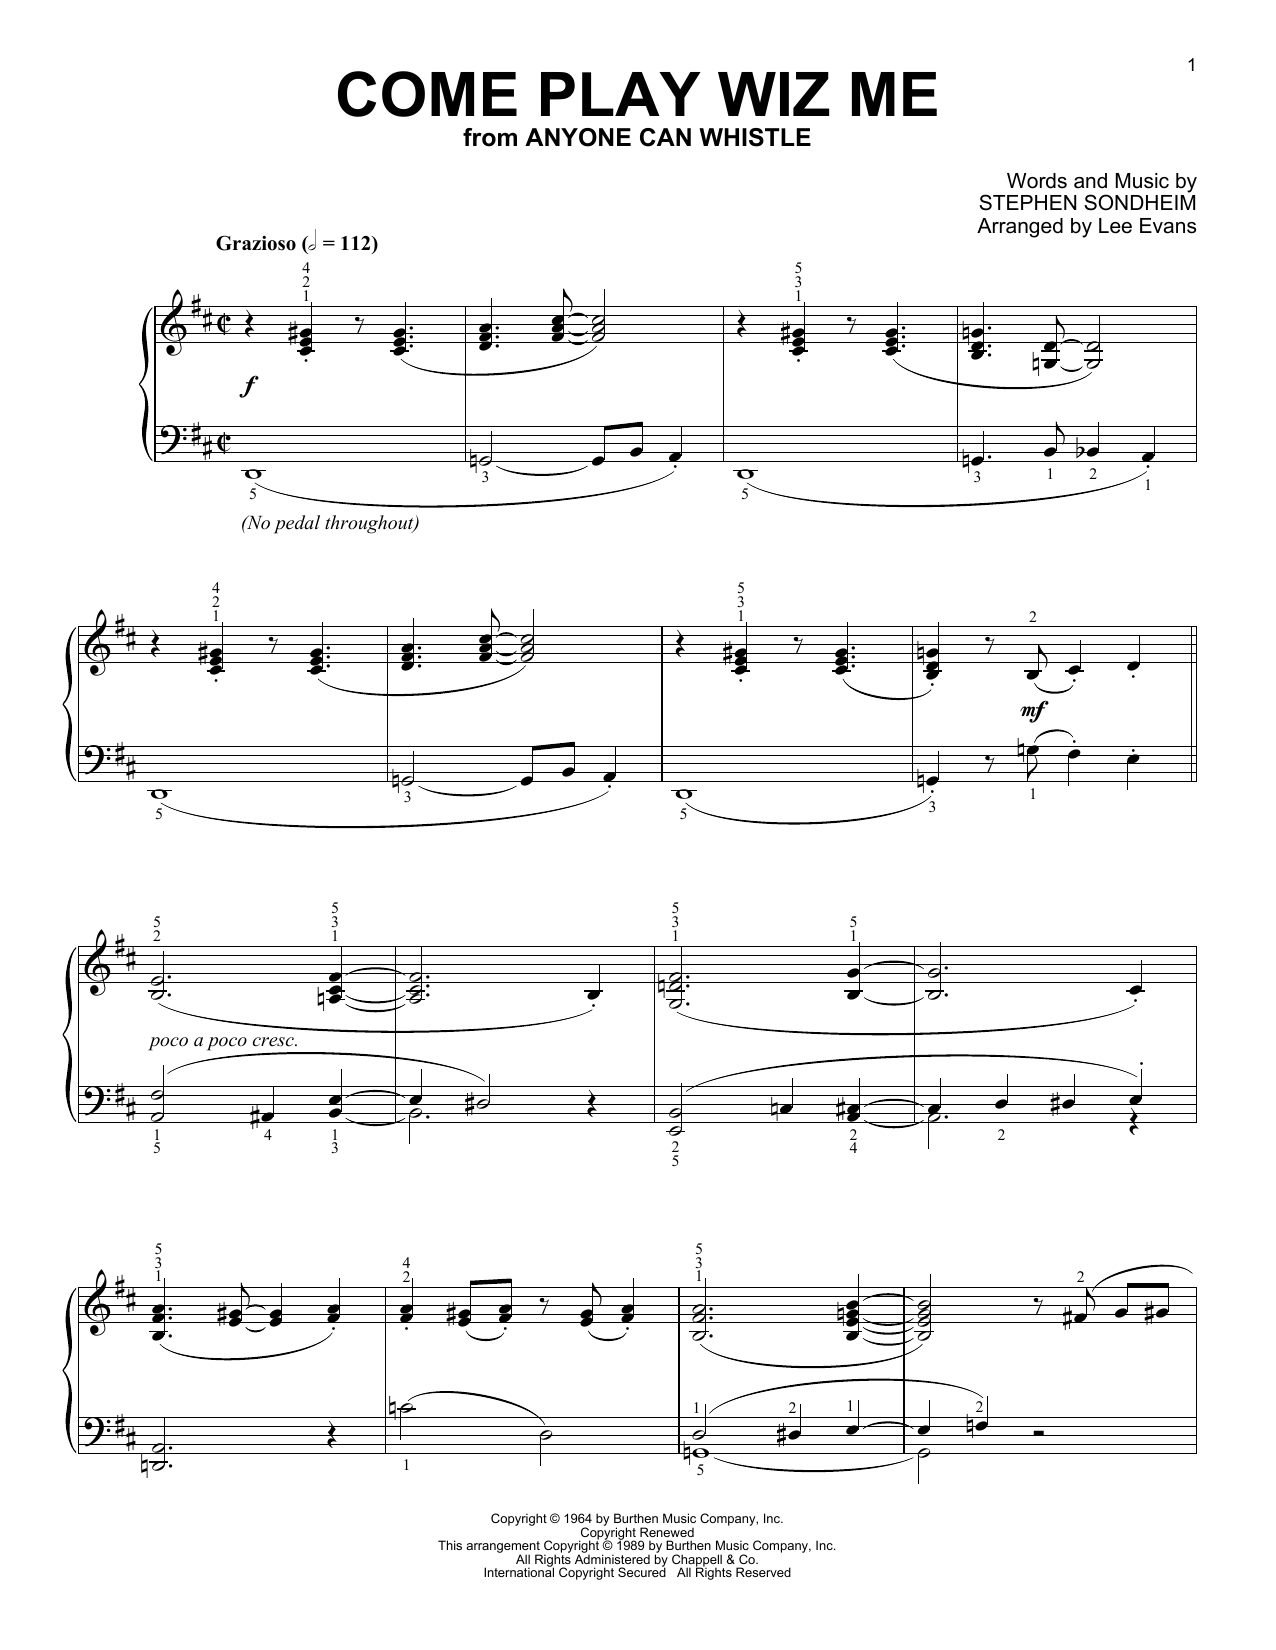 Download Stephen Sondheim Come Play Wiz Me (from Anyone Can Whist Sheet Music